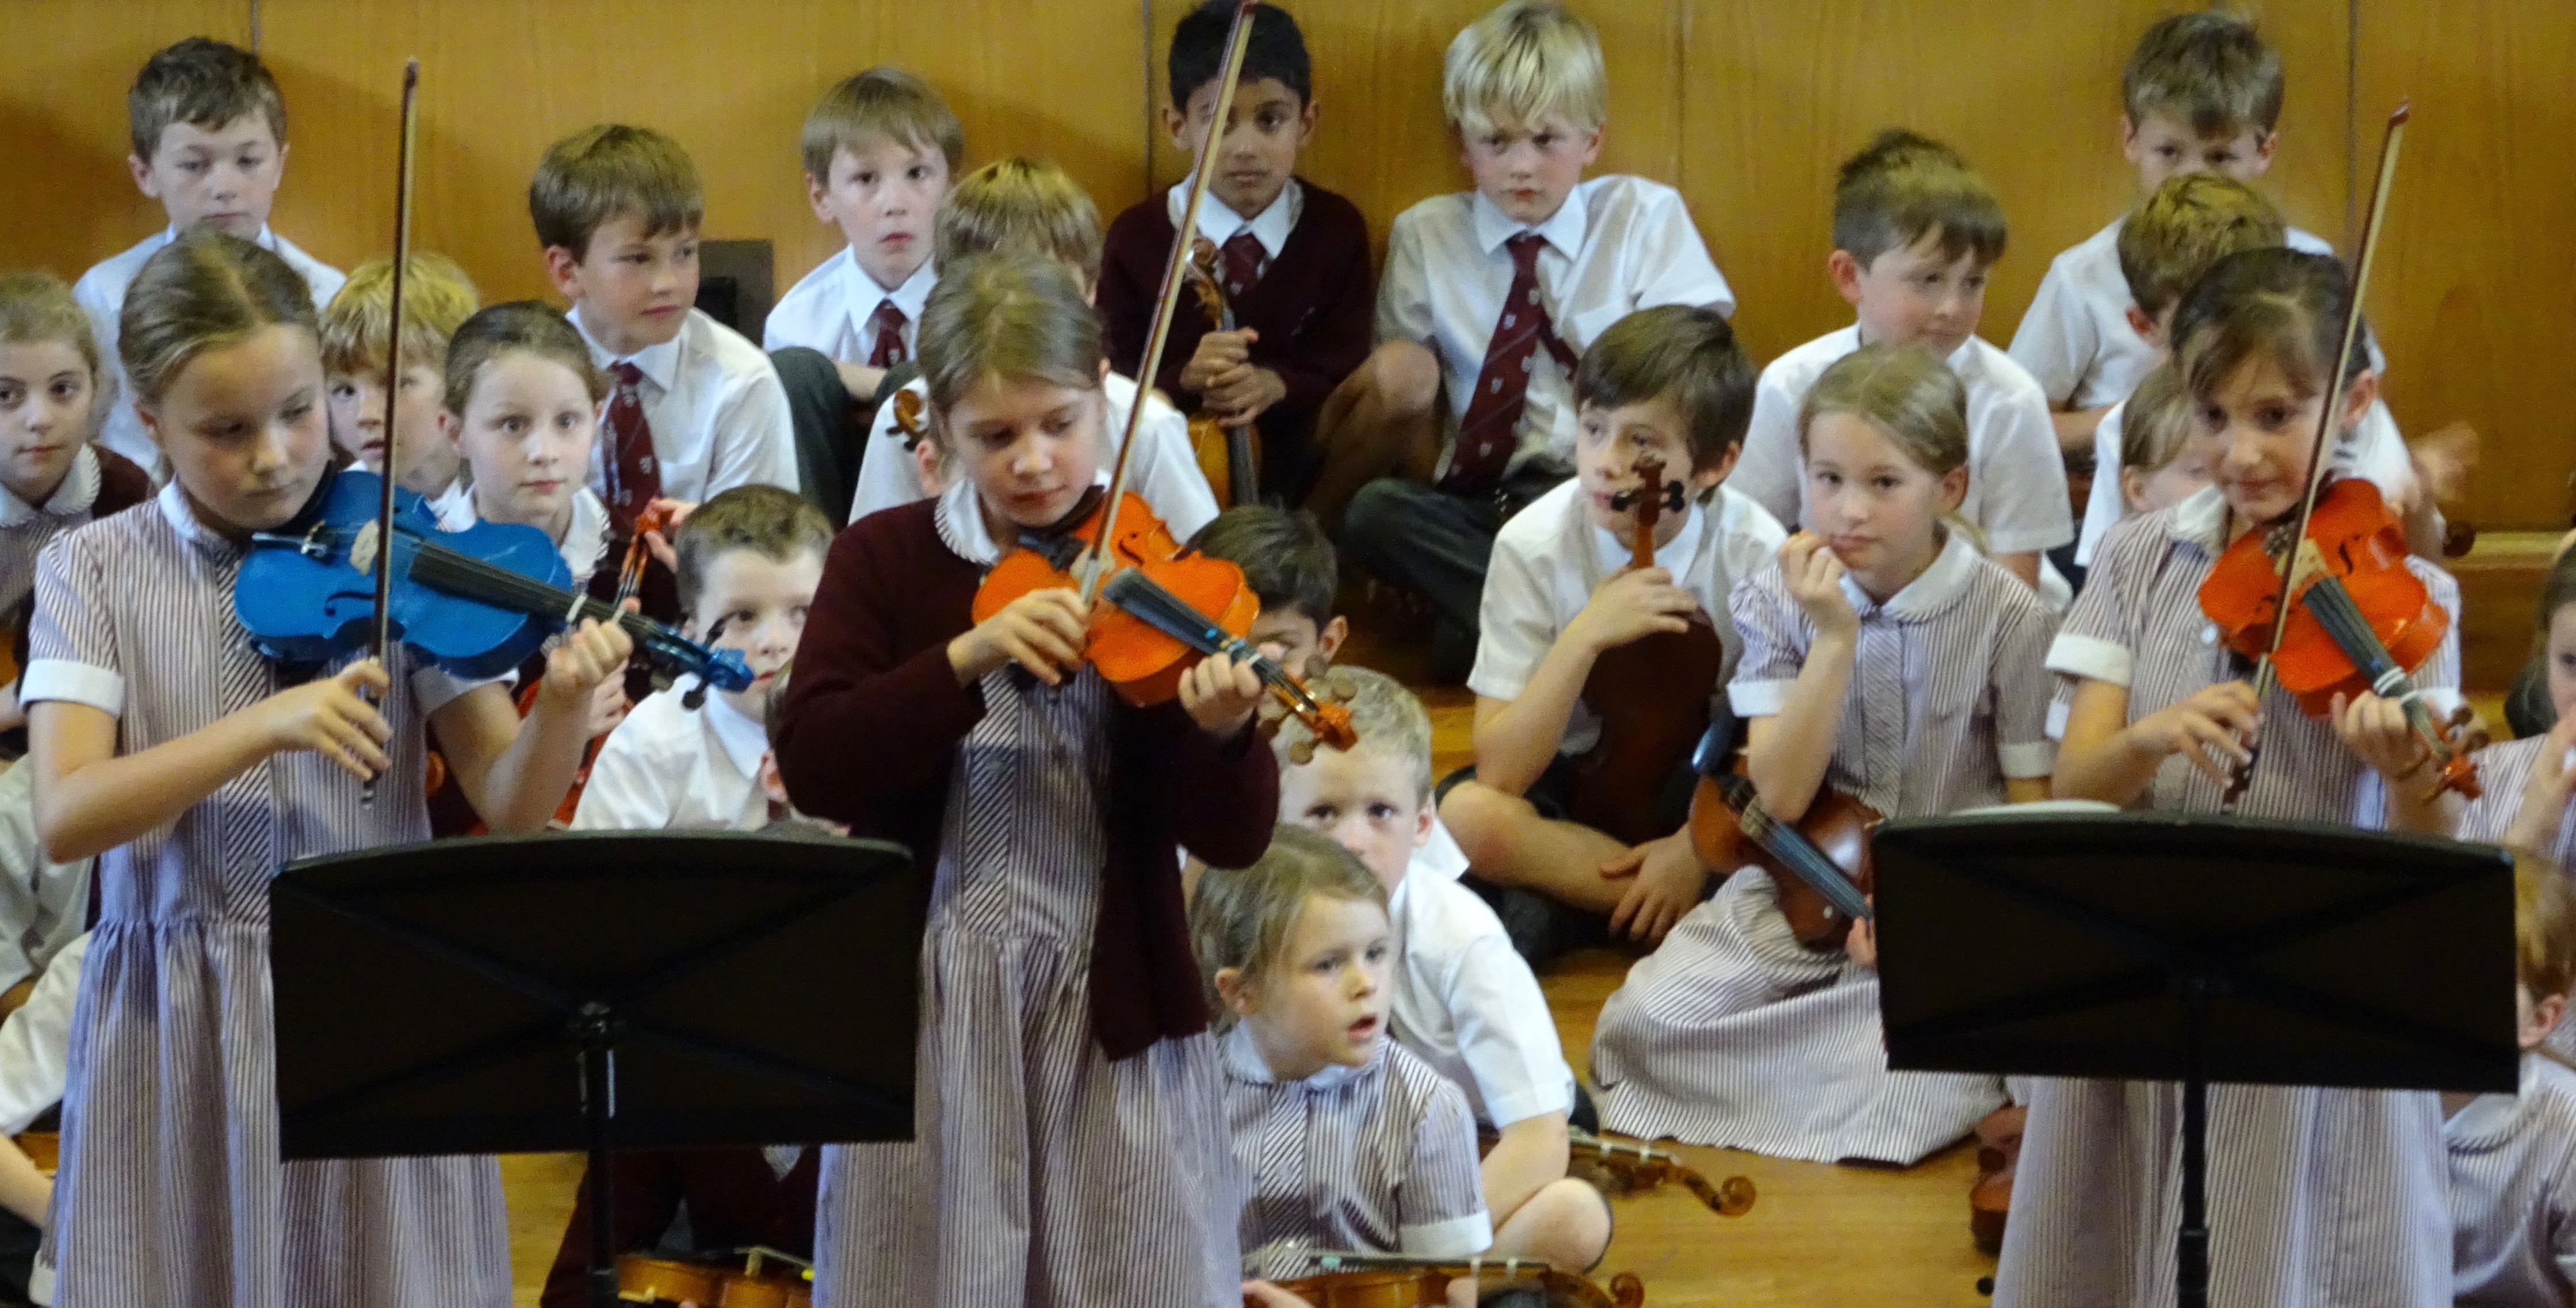 22nd October 2015, Year 3 Strings Concert 1